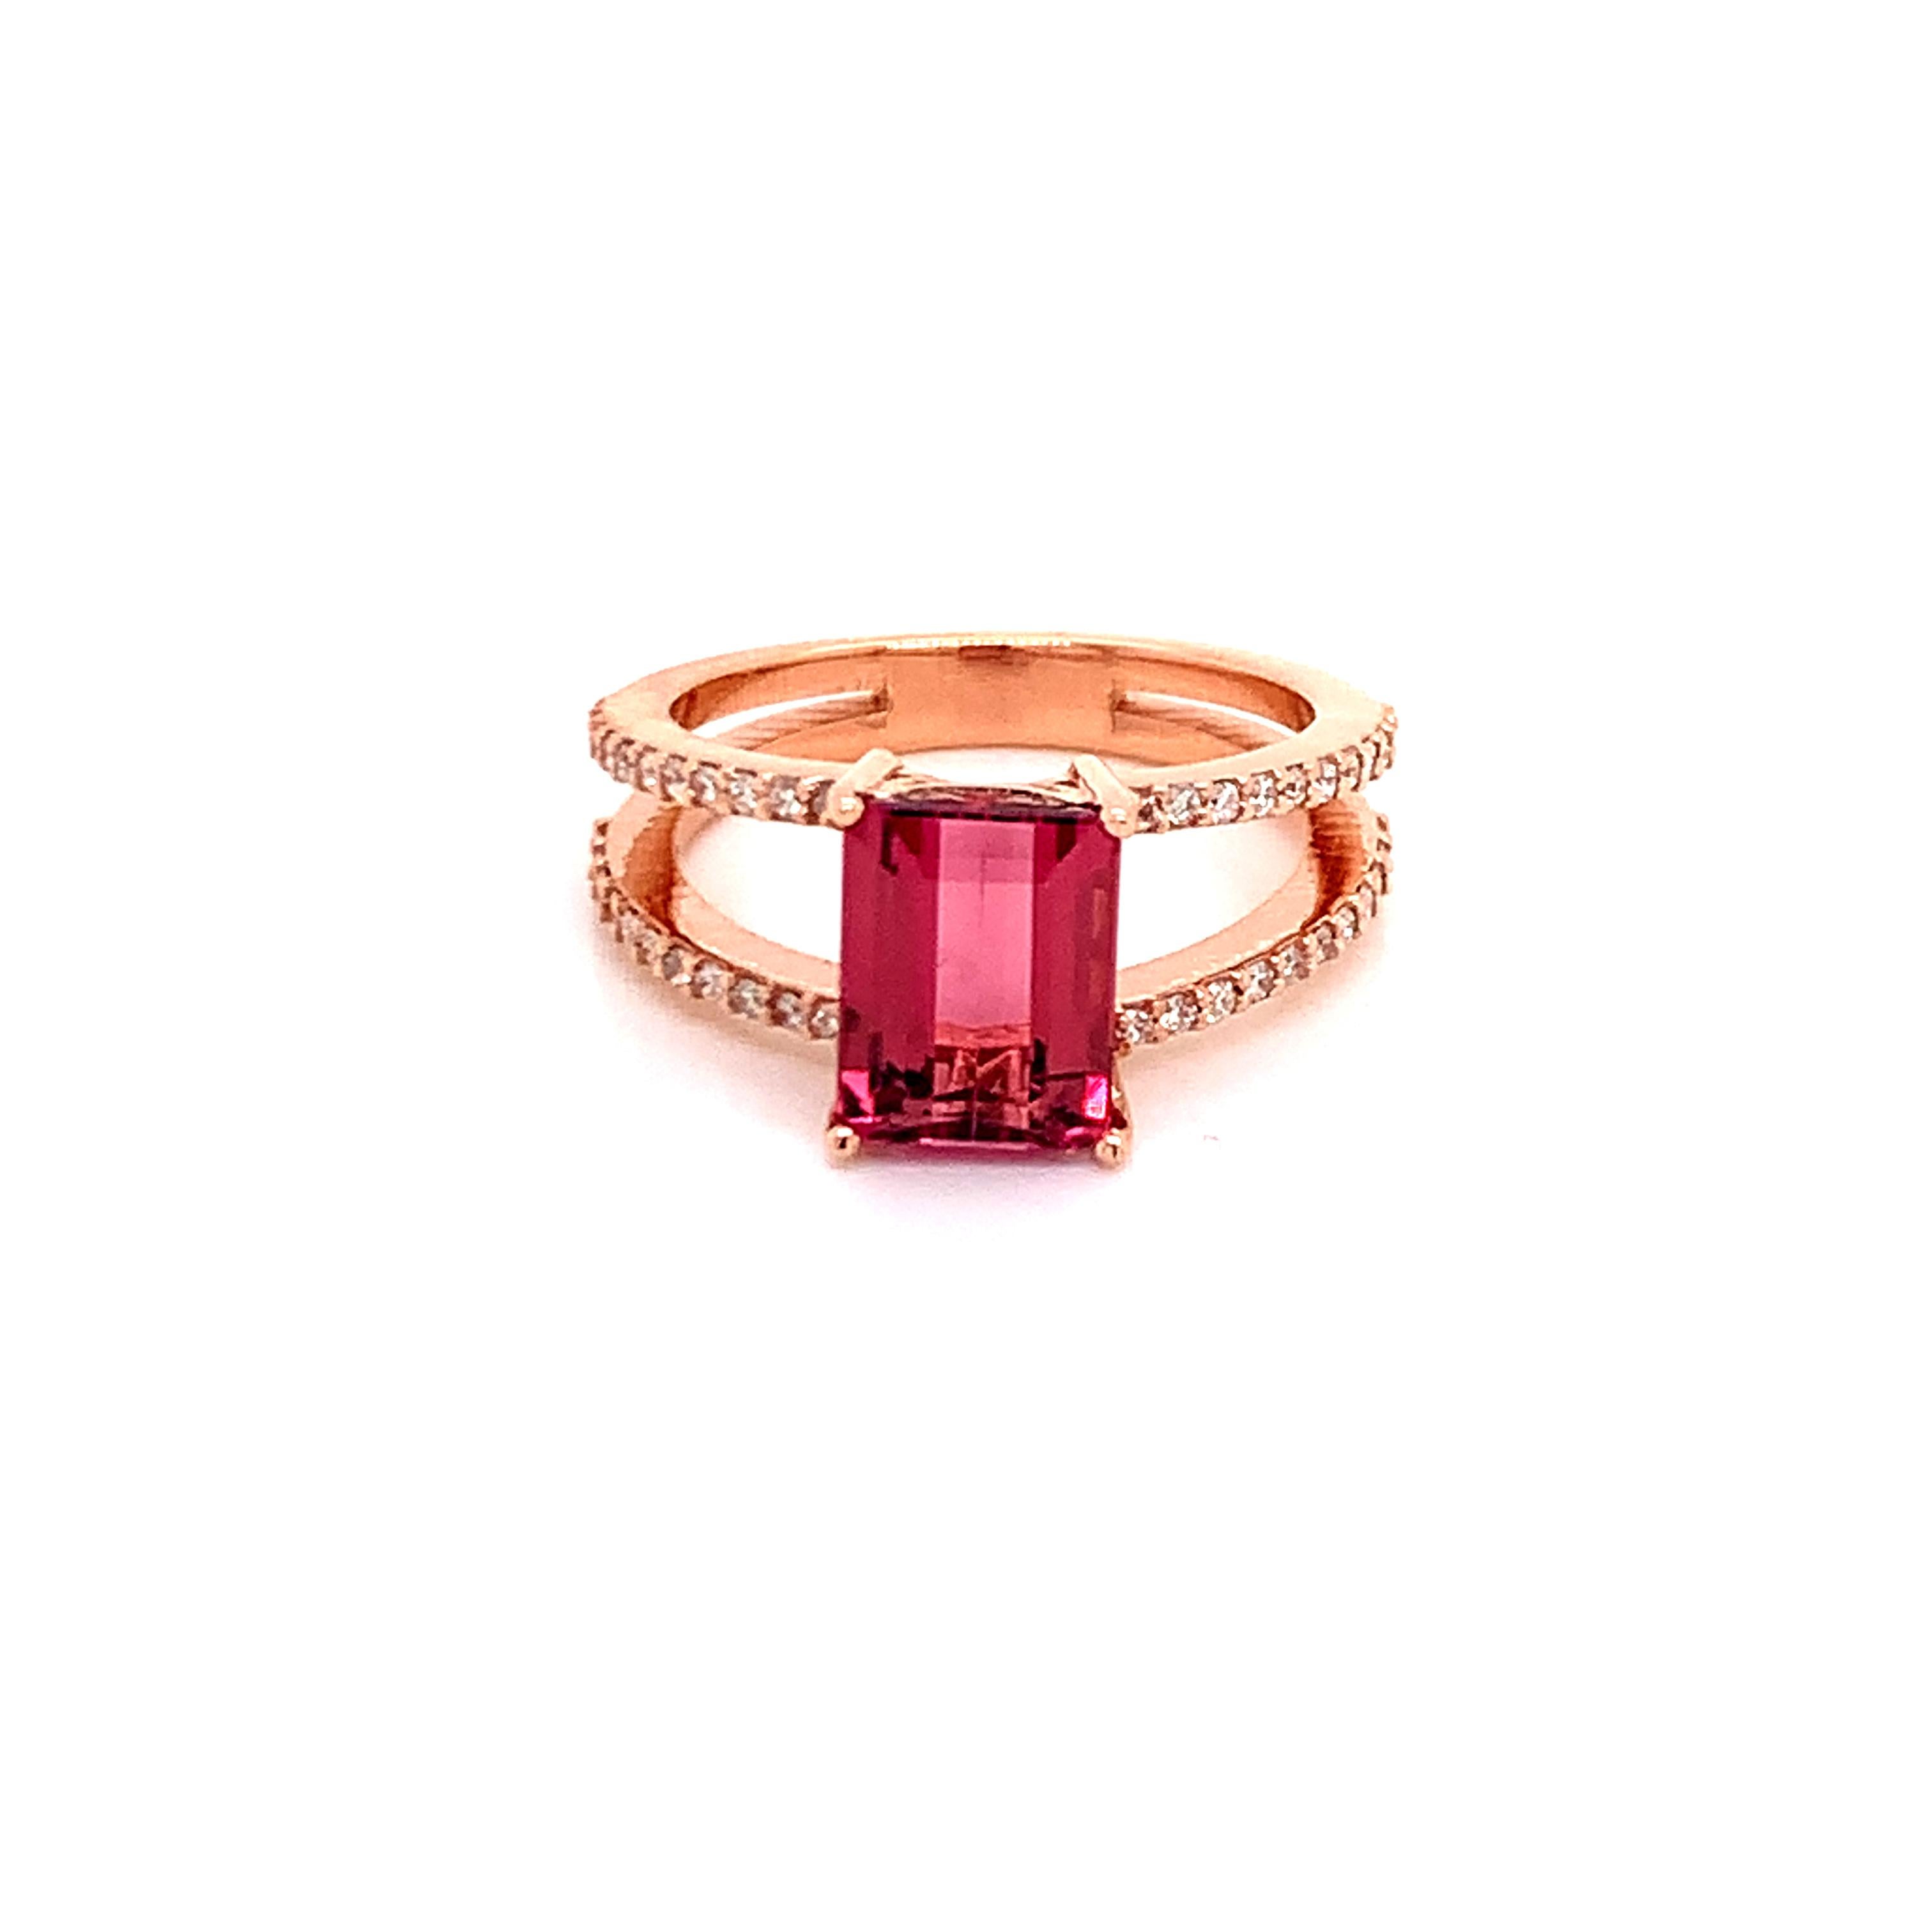 Natural Tourmaline Diamond Ring 14k Rose Gold 2.2 TCW Certified For Sale 7